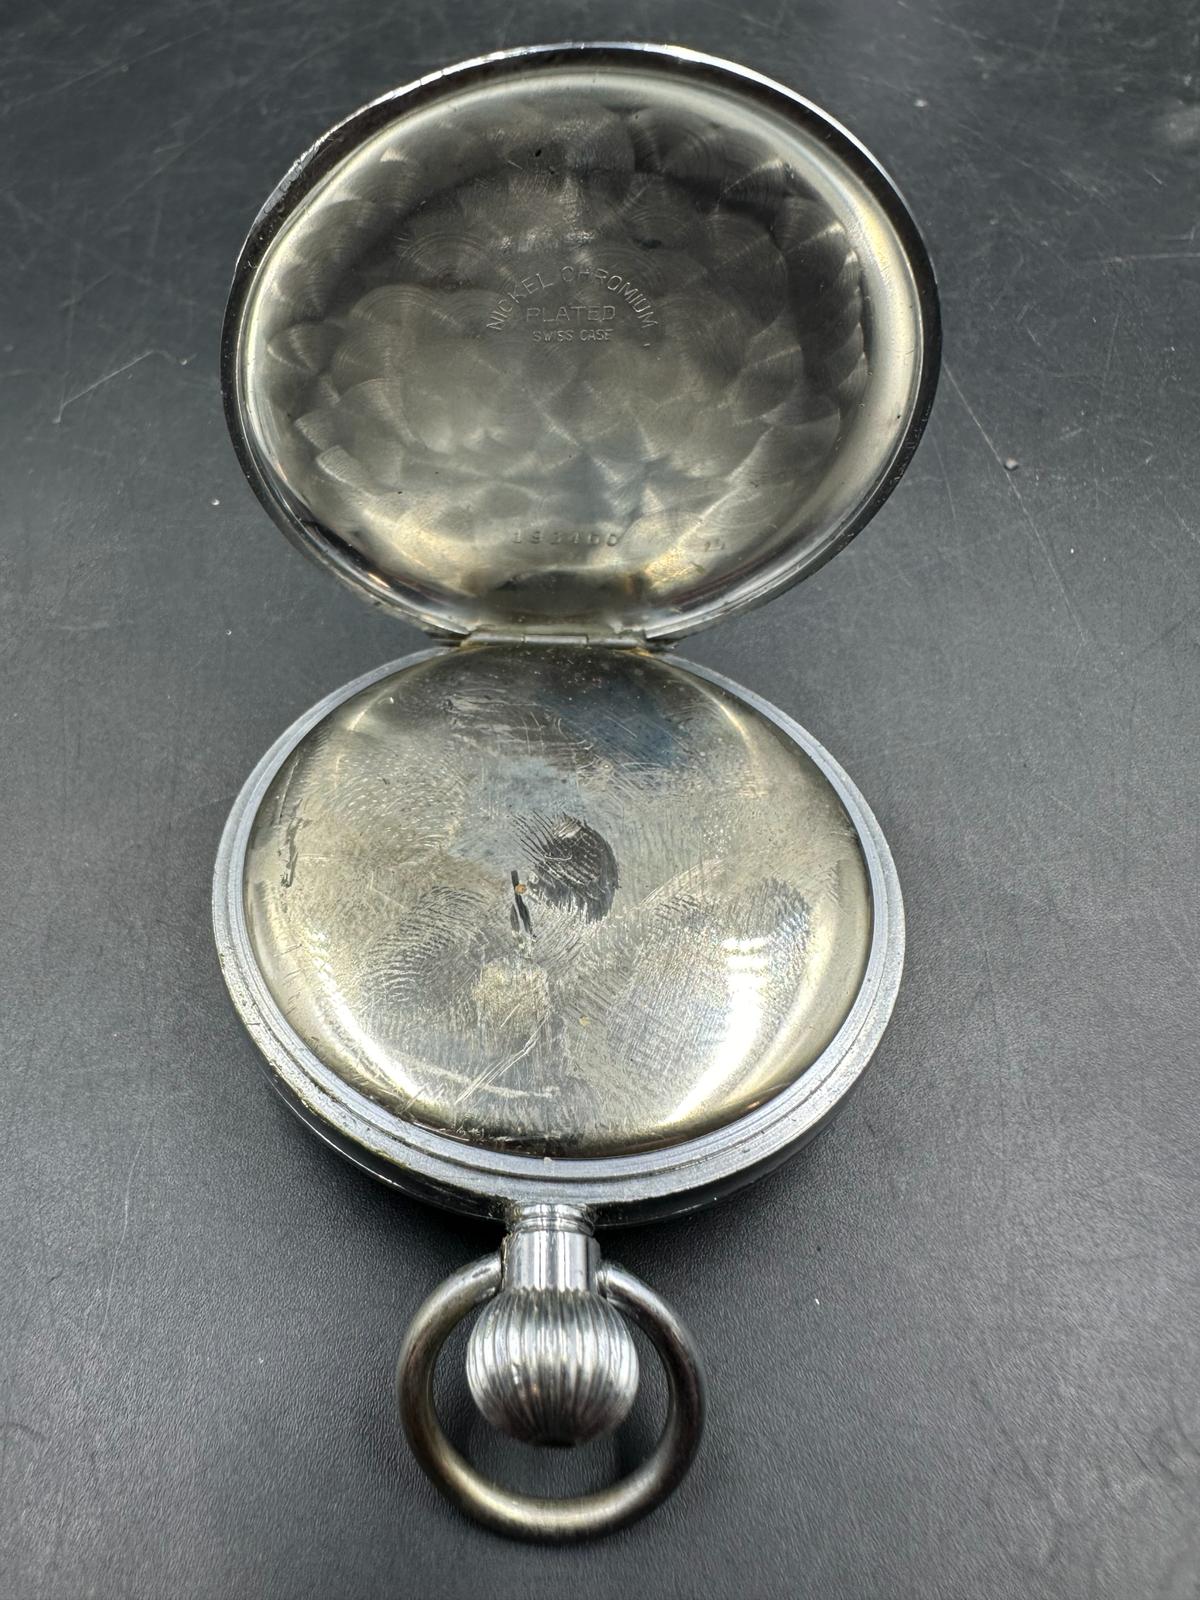 A vintage Bravingtons Renown pocket watch in a nickel chromium plated cess - Image 5 of 6